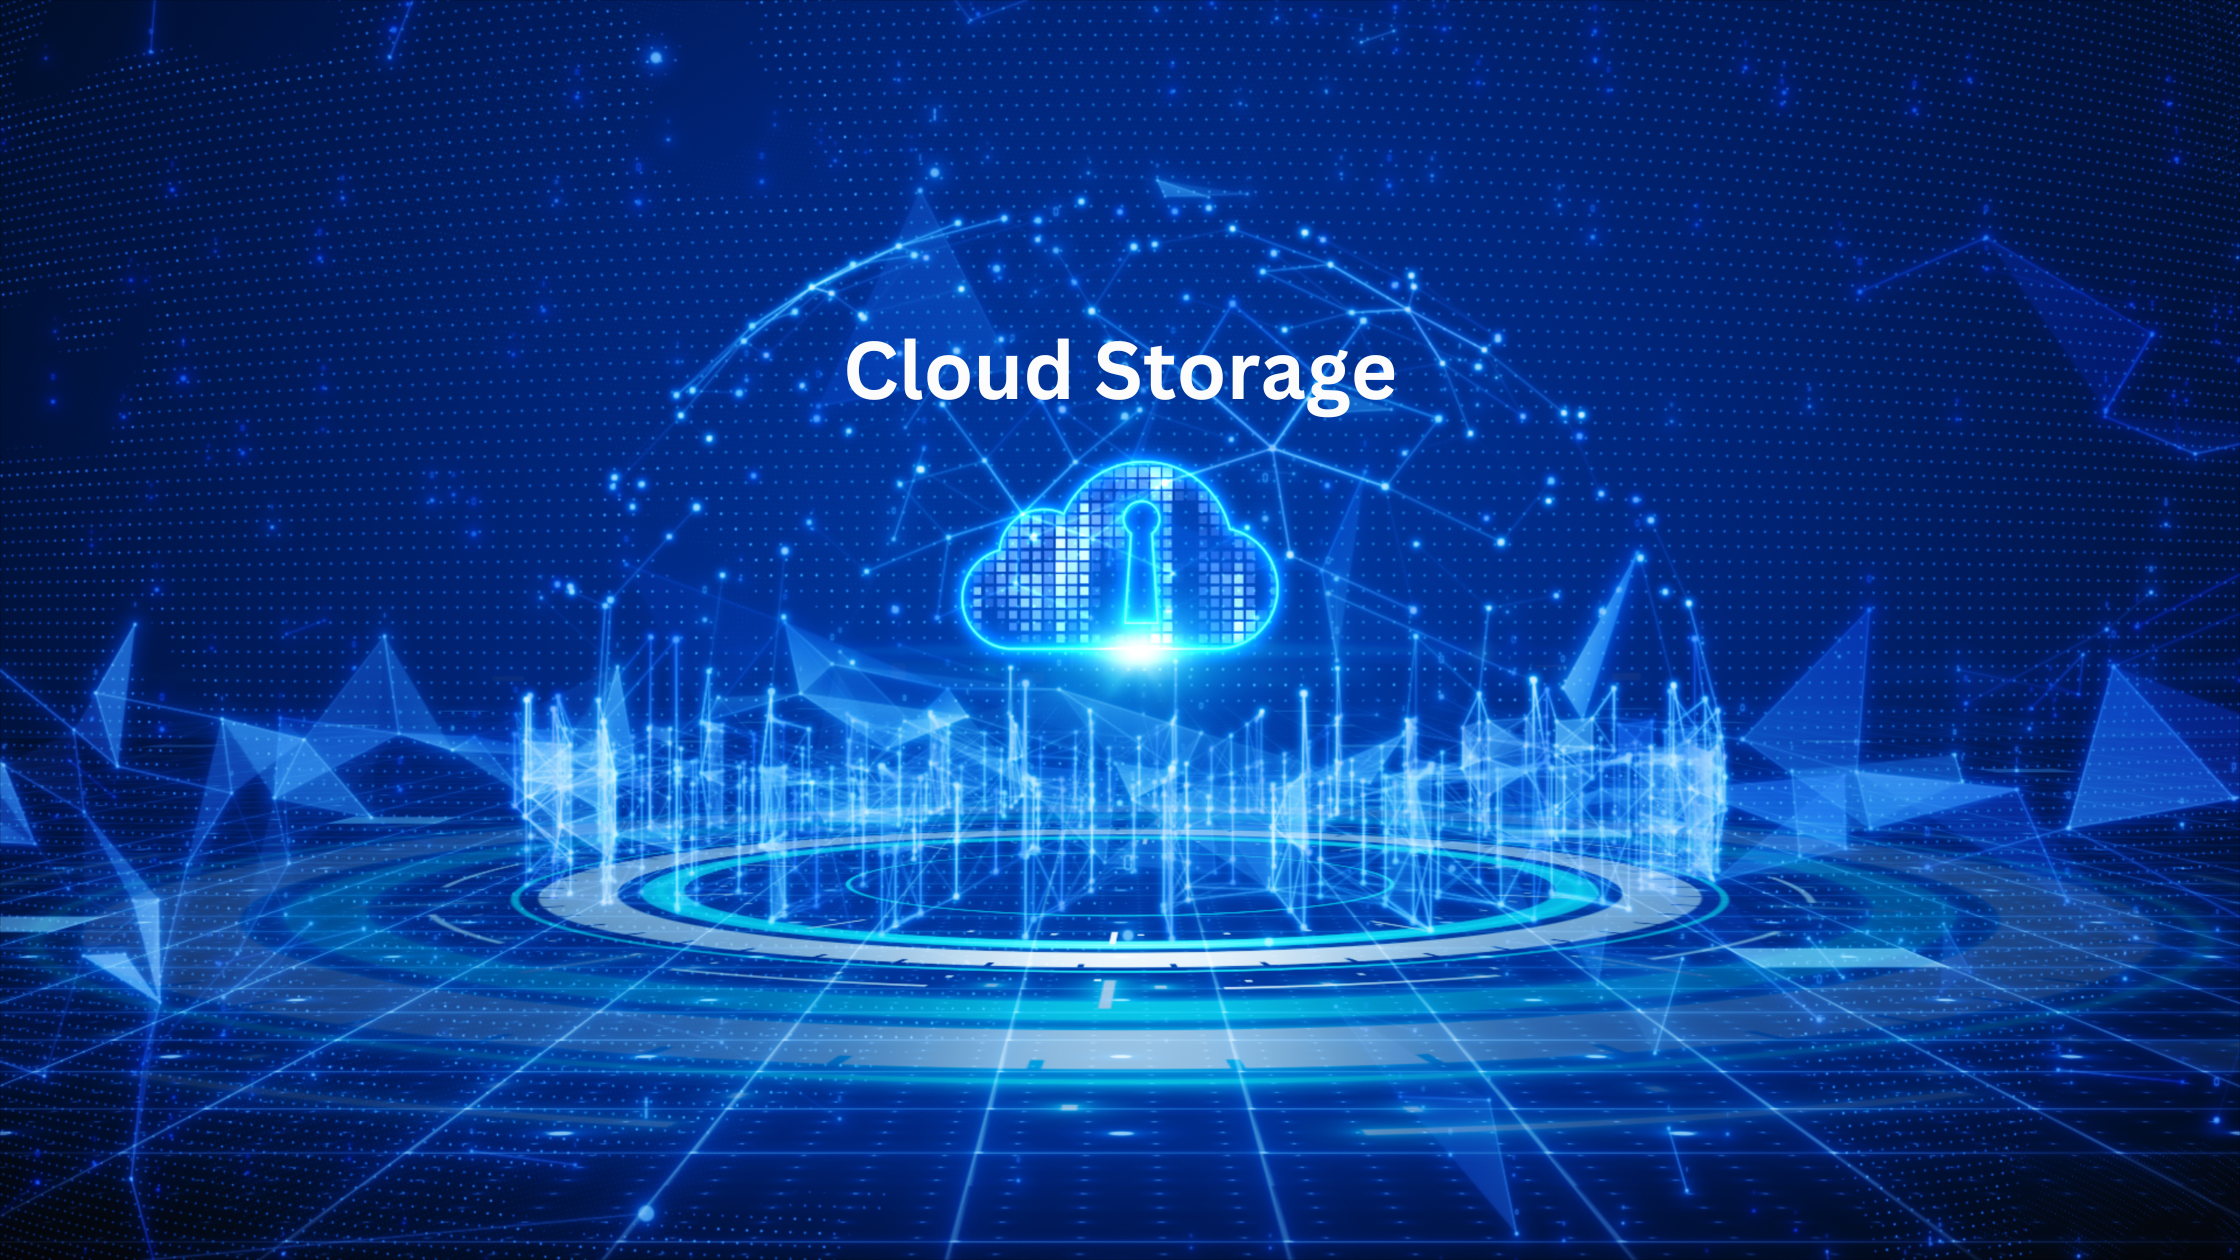 Amazon S3 Explained: A Comprehensive Guide to Cloud Storage Success